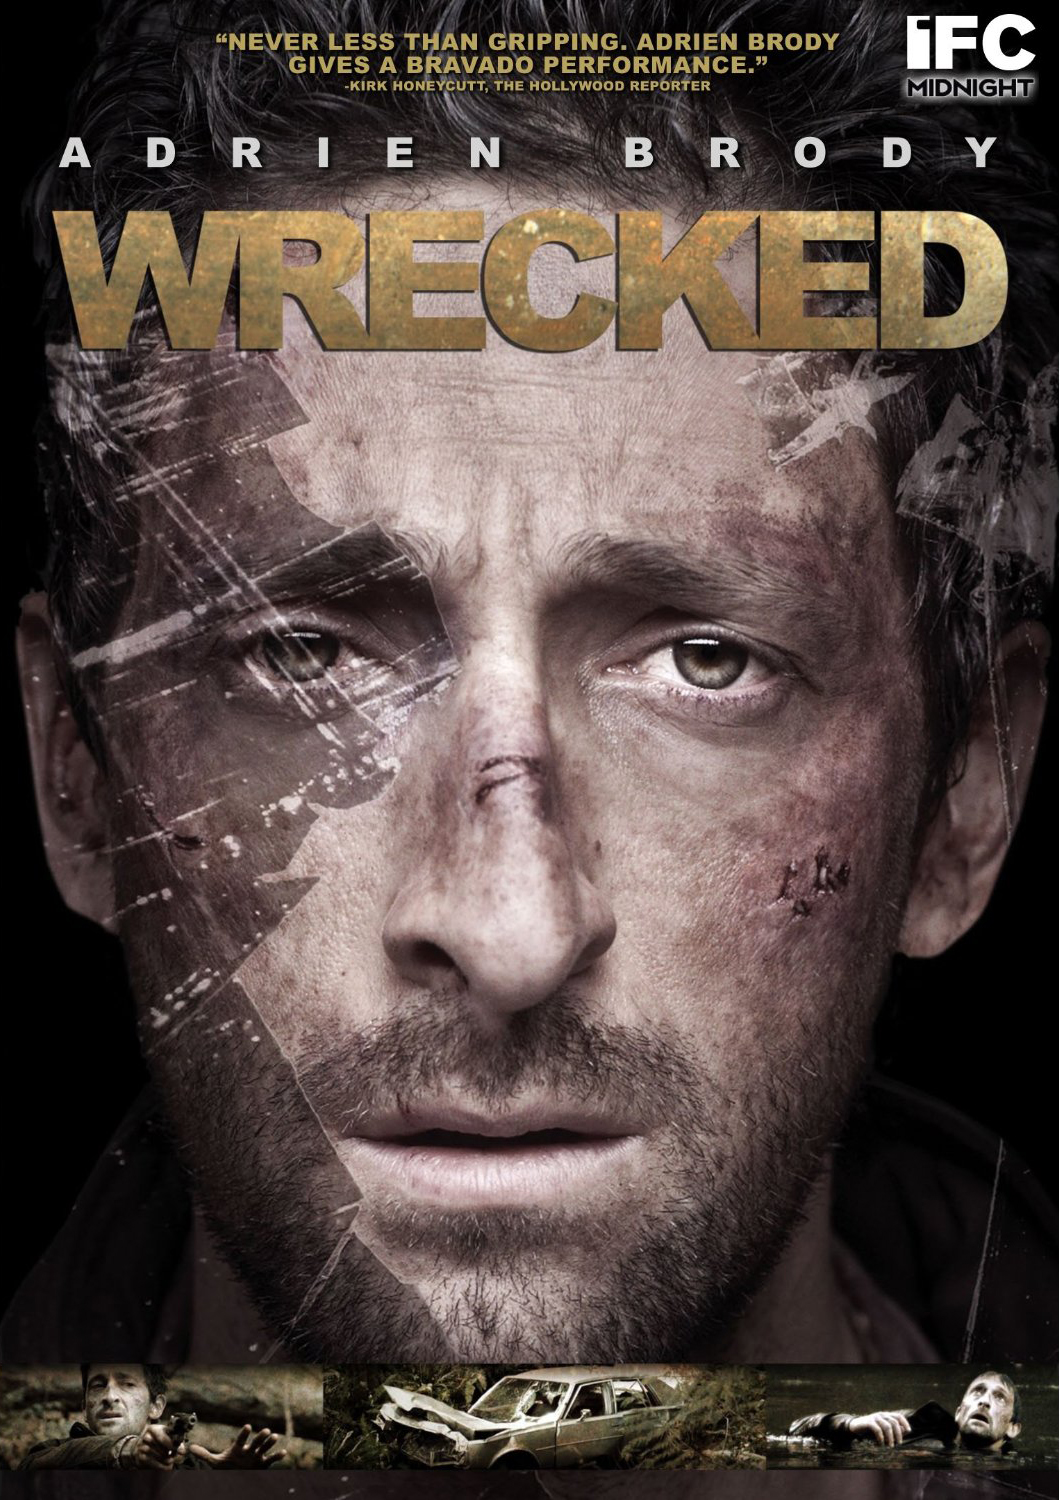 http://s3.picofile.com/file/8209181568/wrecked.jpg